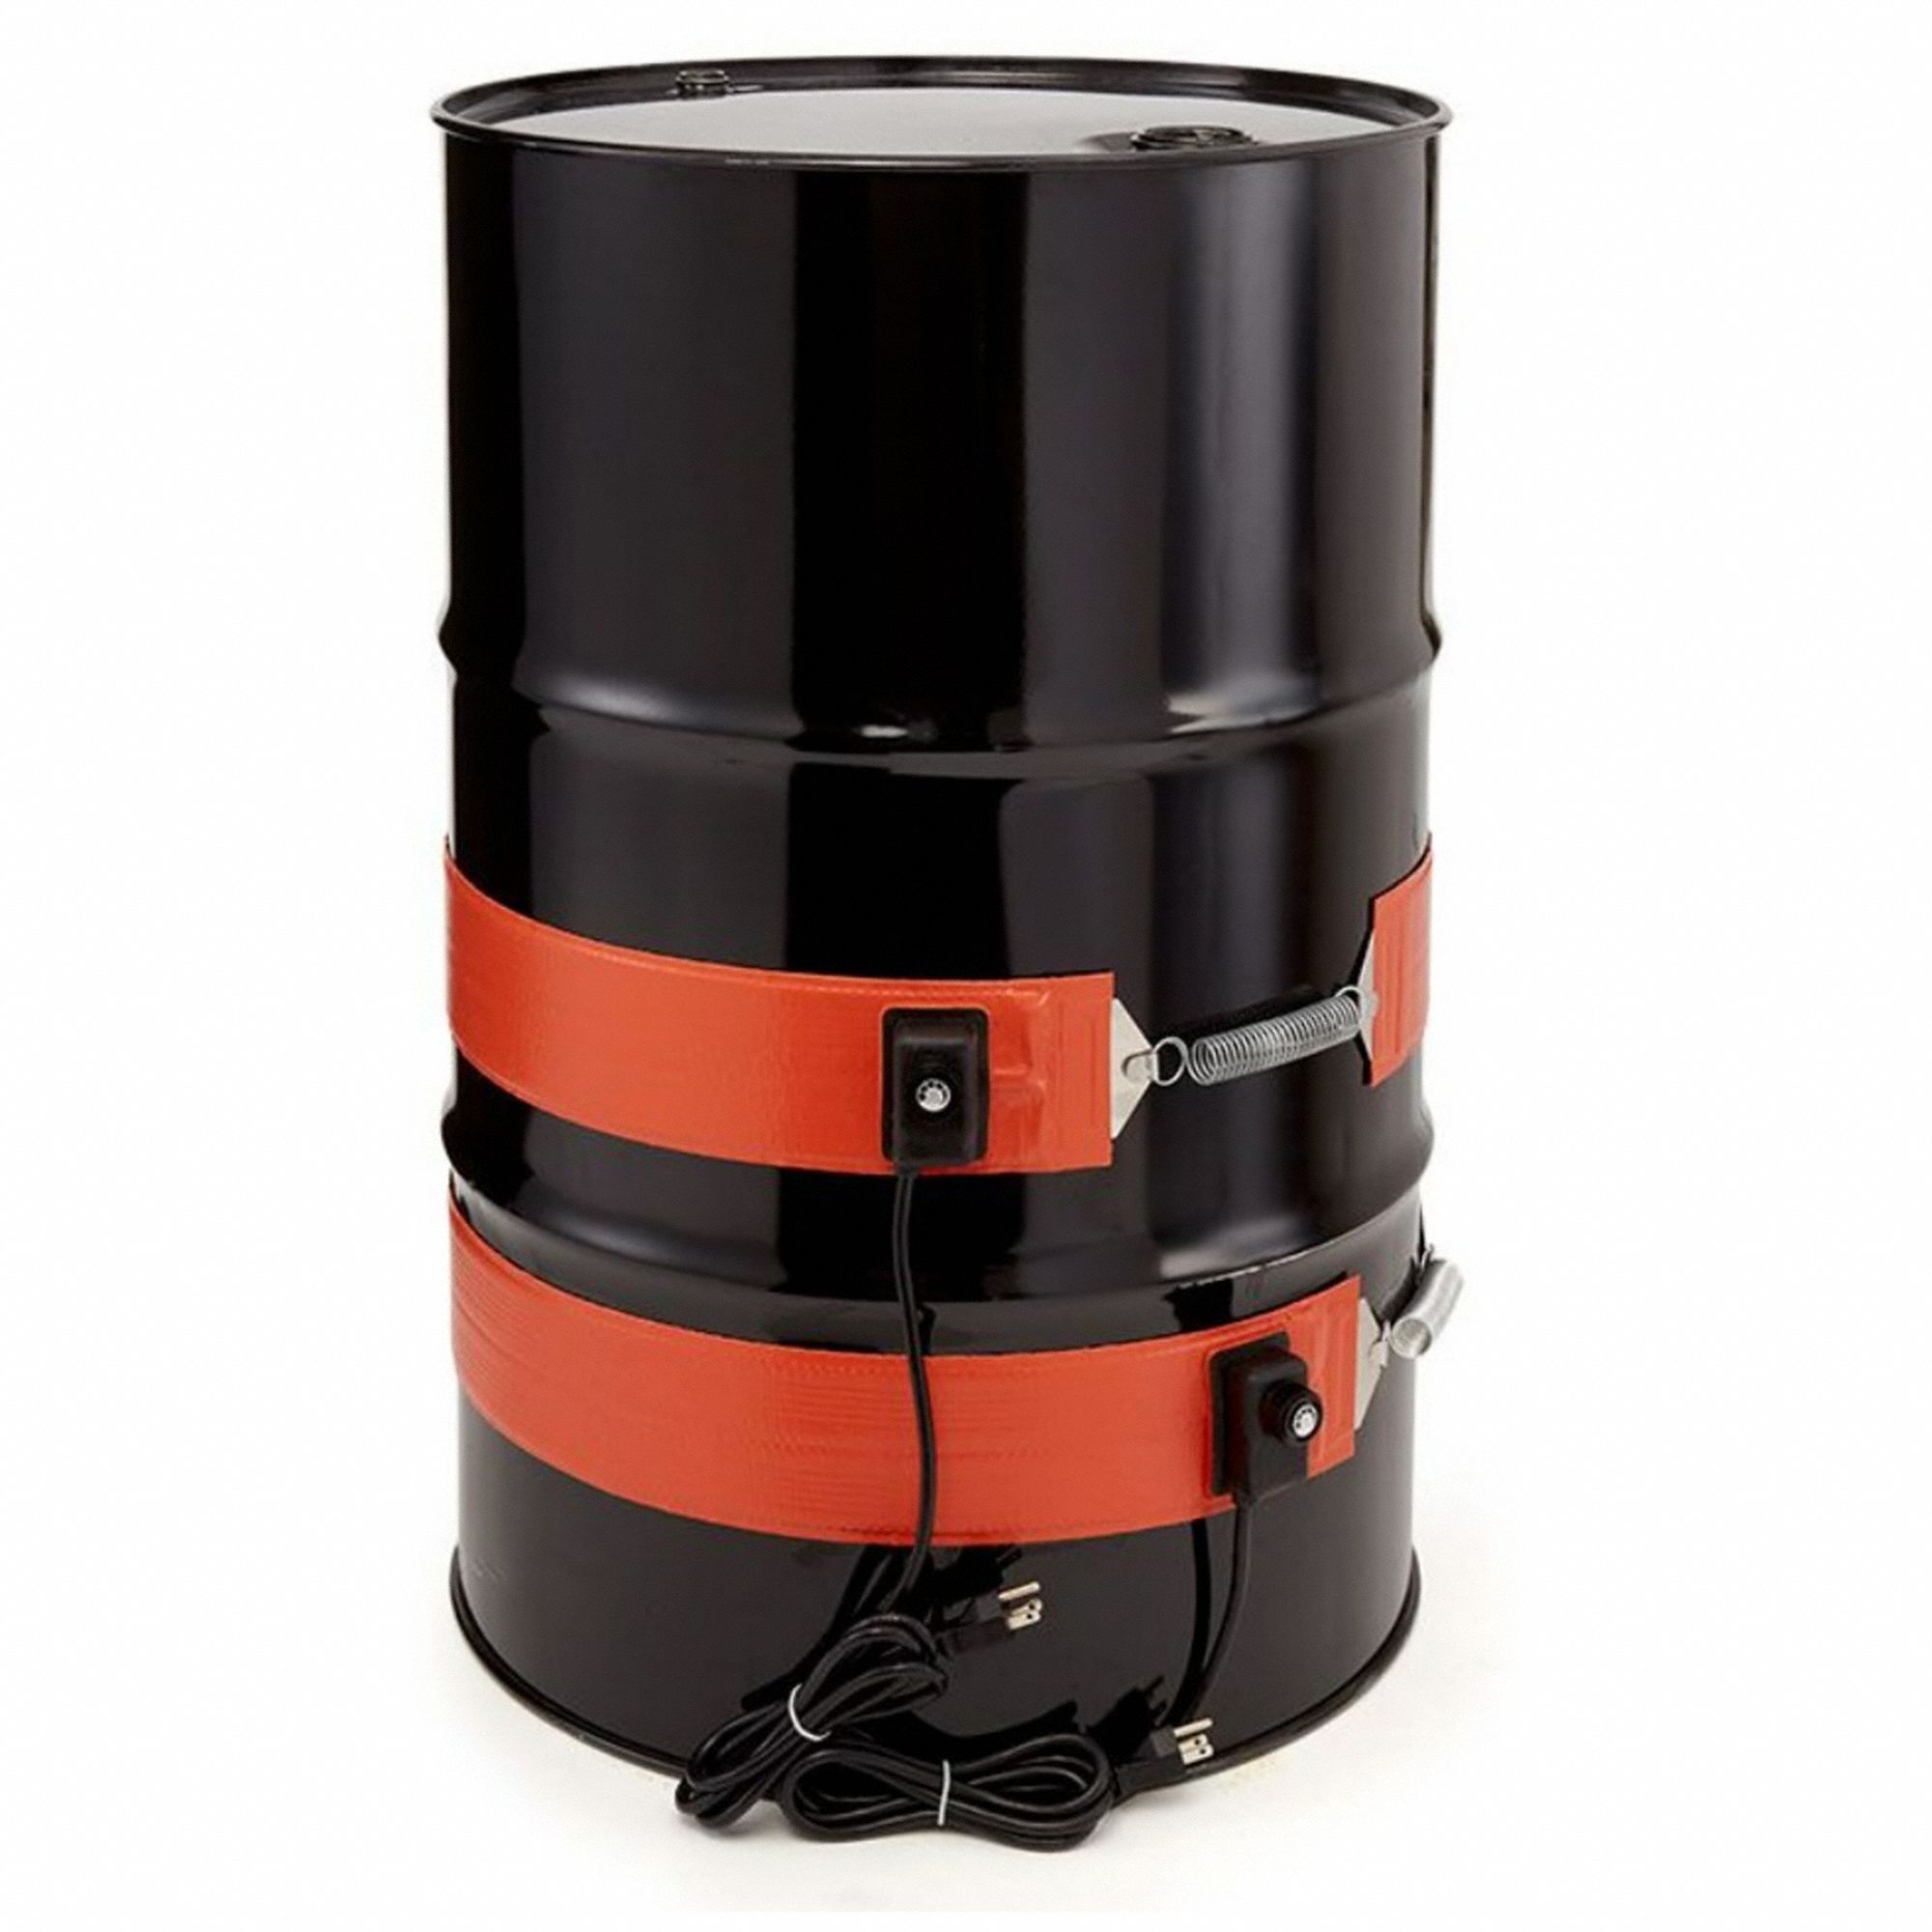 120VAC Diameter: 14-Inch Fits 15-Gallon Drums 3-Layer Reinforced Silicone Rubber W x L: 4 x 44-Inch BriskHeat DHCH11 DHCH Extra Heavy Duty Metal Drum Heater 